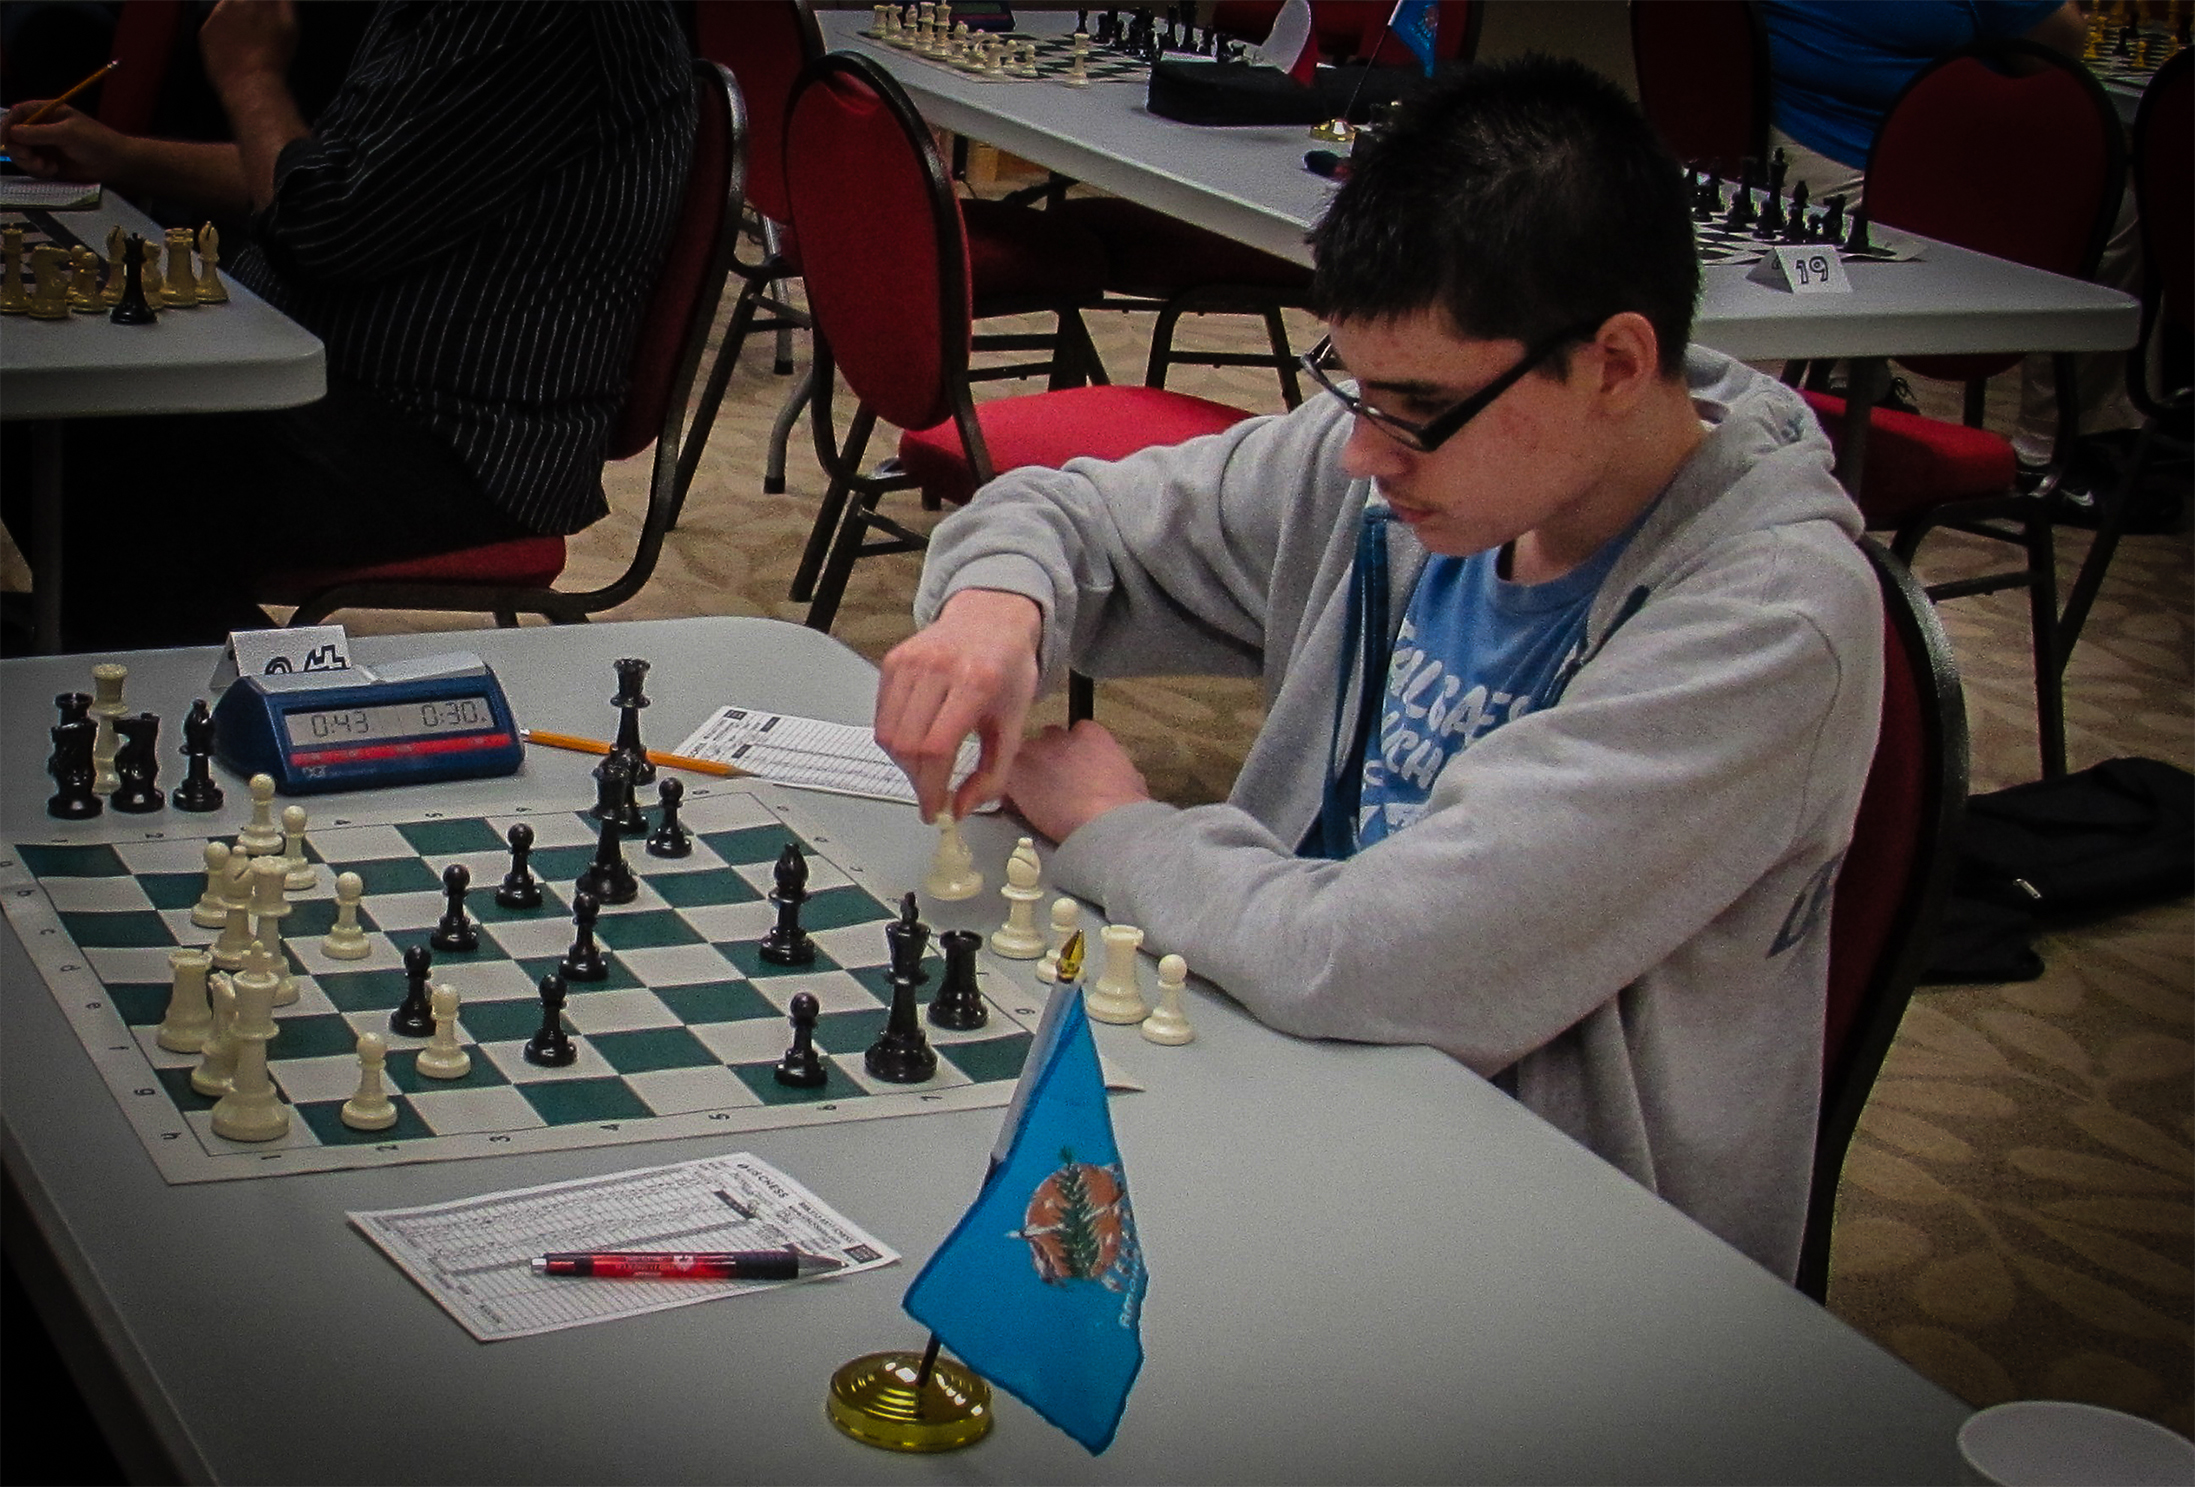 Lawton's Jayden Dewbre played in the Murray County Open and then played a couple of Extra Rated games with a G/30 time control.  By the end of the day he had scored 2.5/4.0 and gained 22 rating points.  He is ranked in the 73rd Percentile for all USA chess players and in the 87th Percentile for all USA Juniors  Photo by Mike Tubbs.